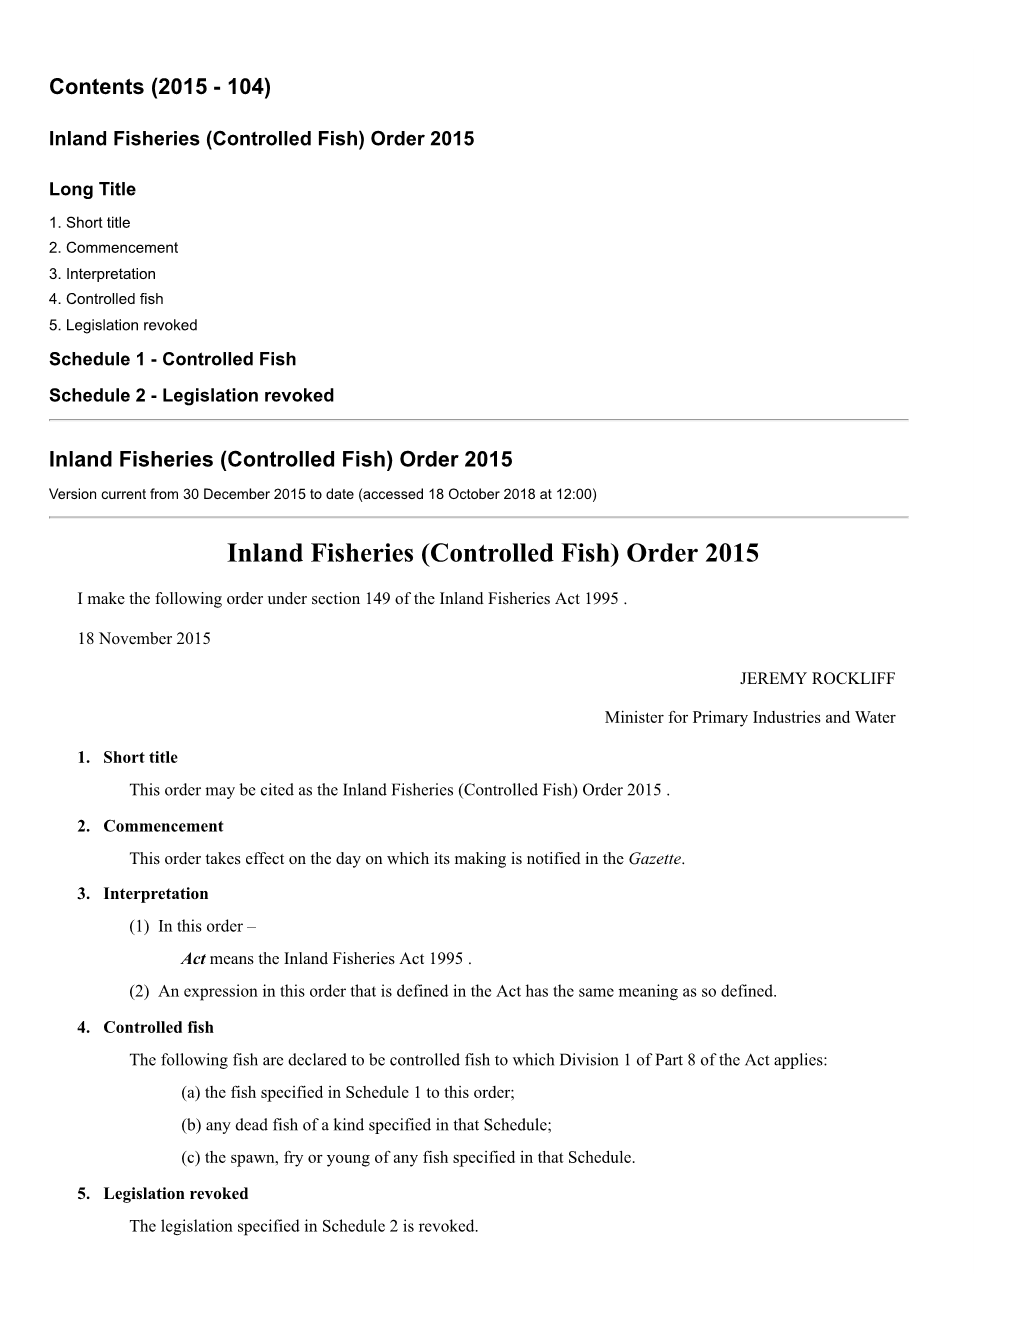 Inland Fisheries (Controlled Fish) Order 2015